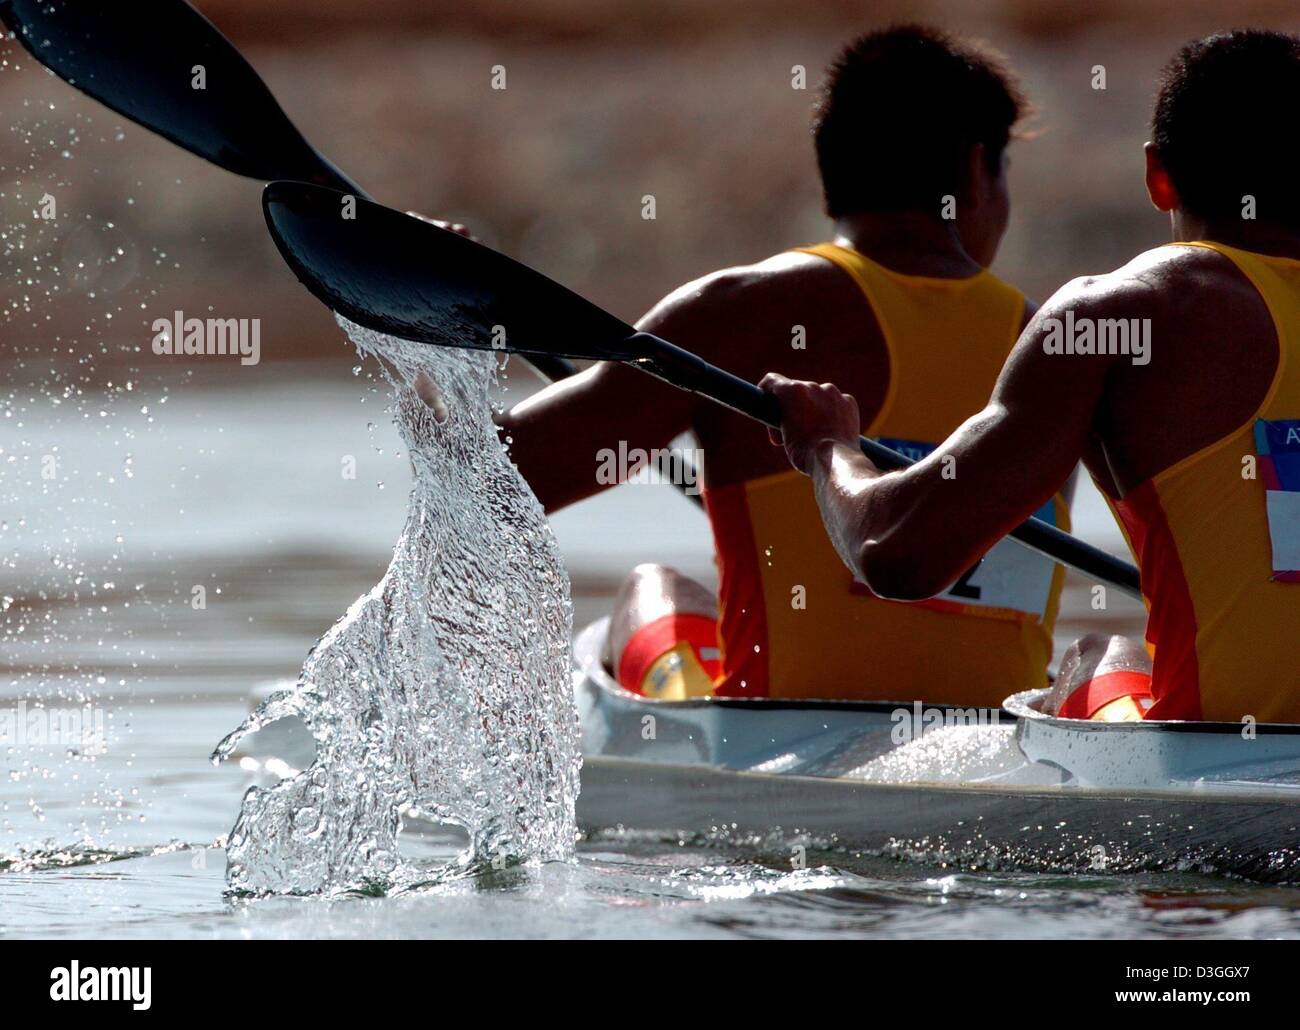 (dpa) - Paddles of Chinese Yijun Yin and Lei Wang splash in the water during a qualification heat of the Men's Olympic Kayak K2 500 m at Schinias Rowing and Canoeing Centre, Greece, 26 August 2004. Stock Photo